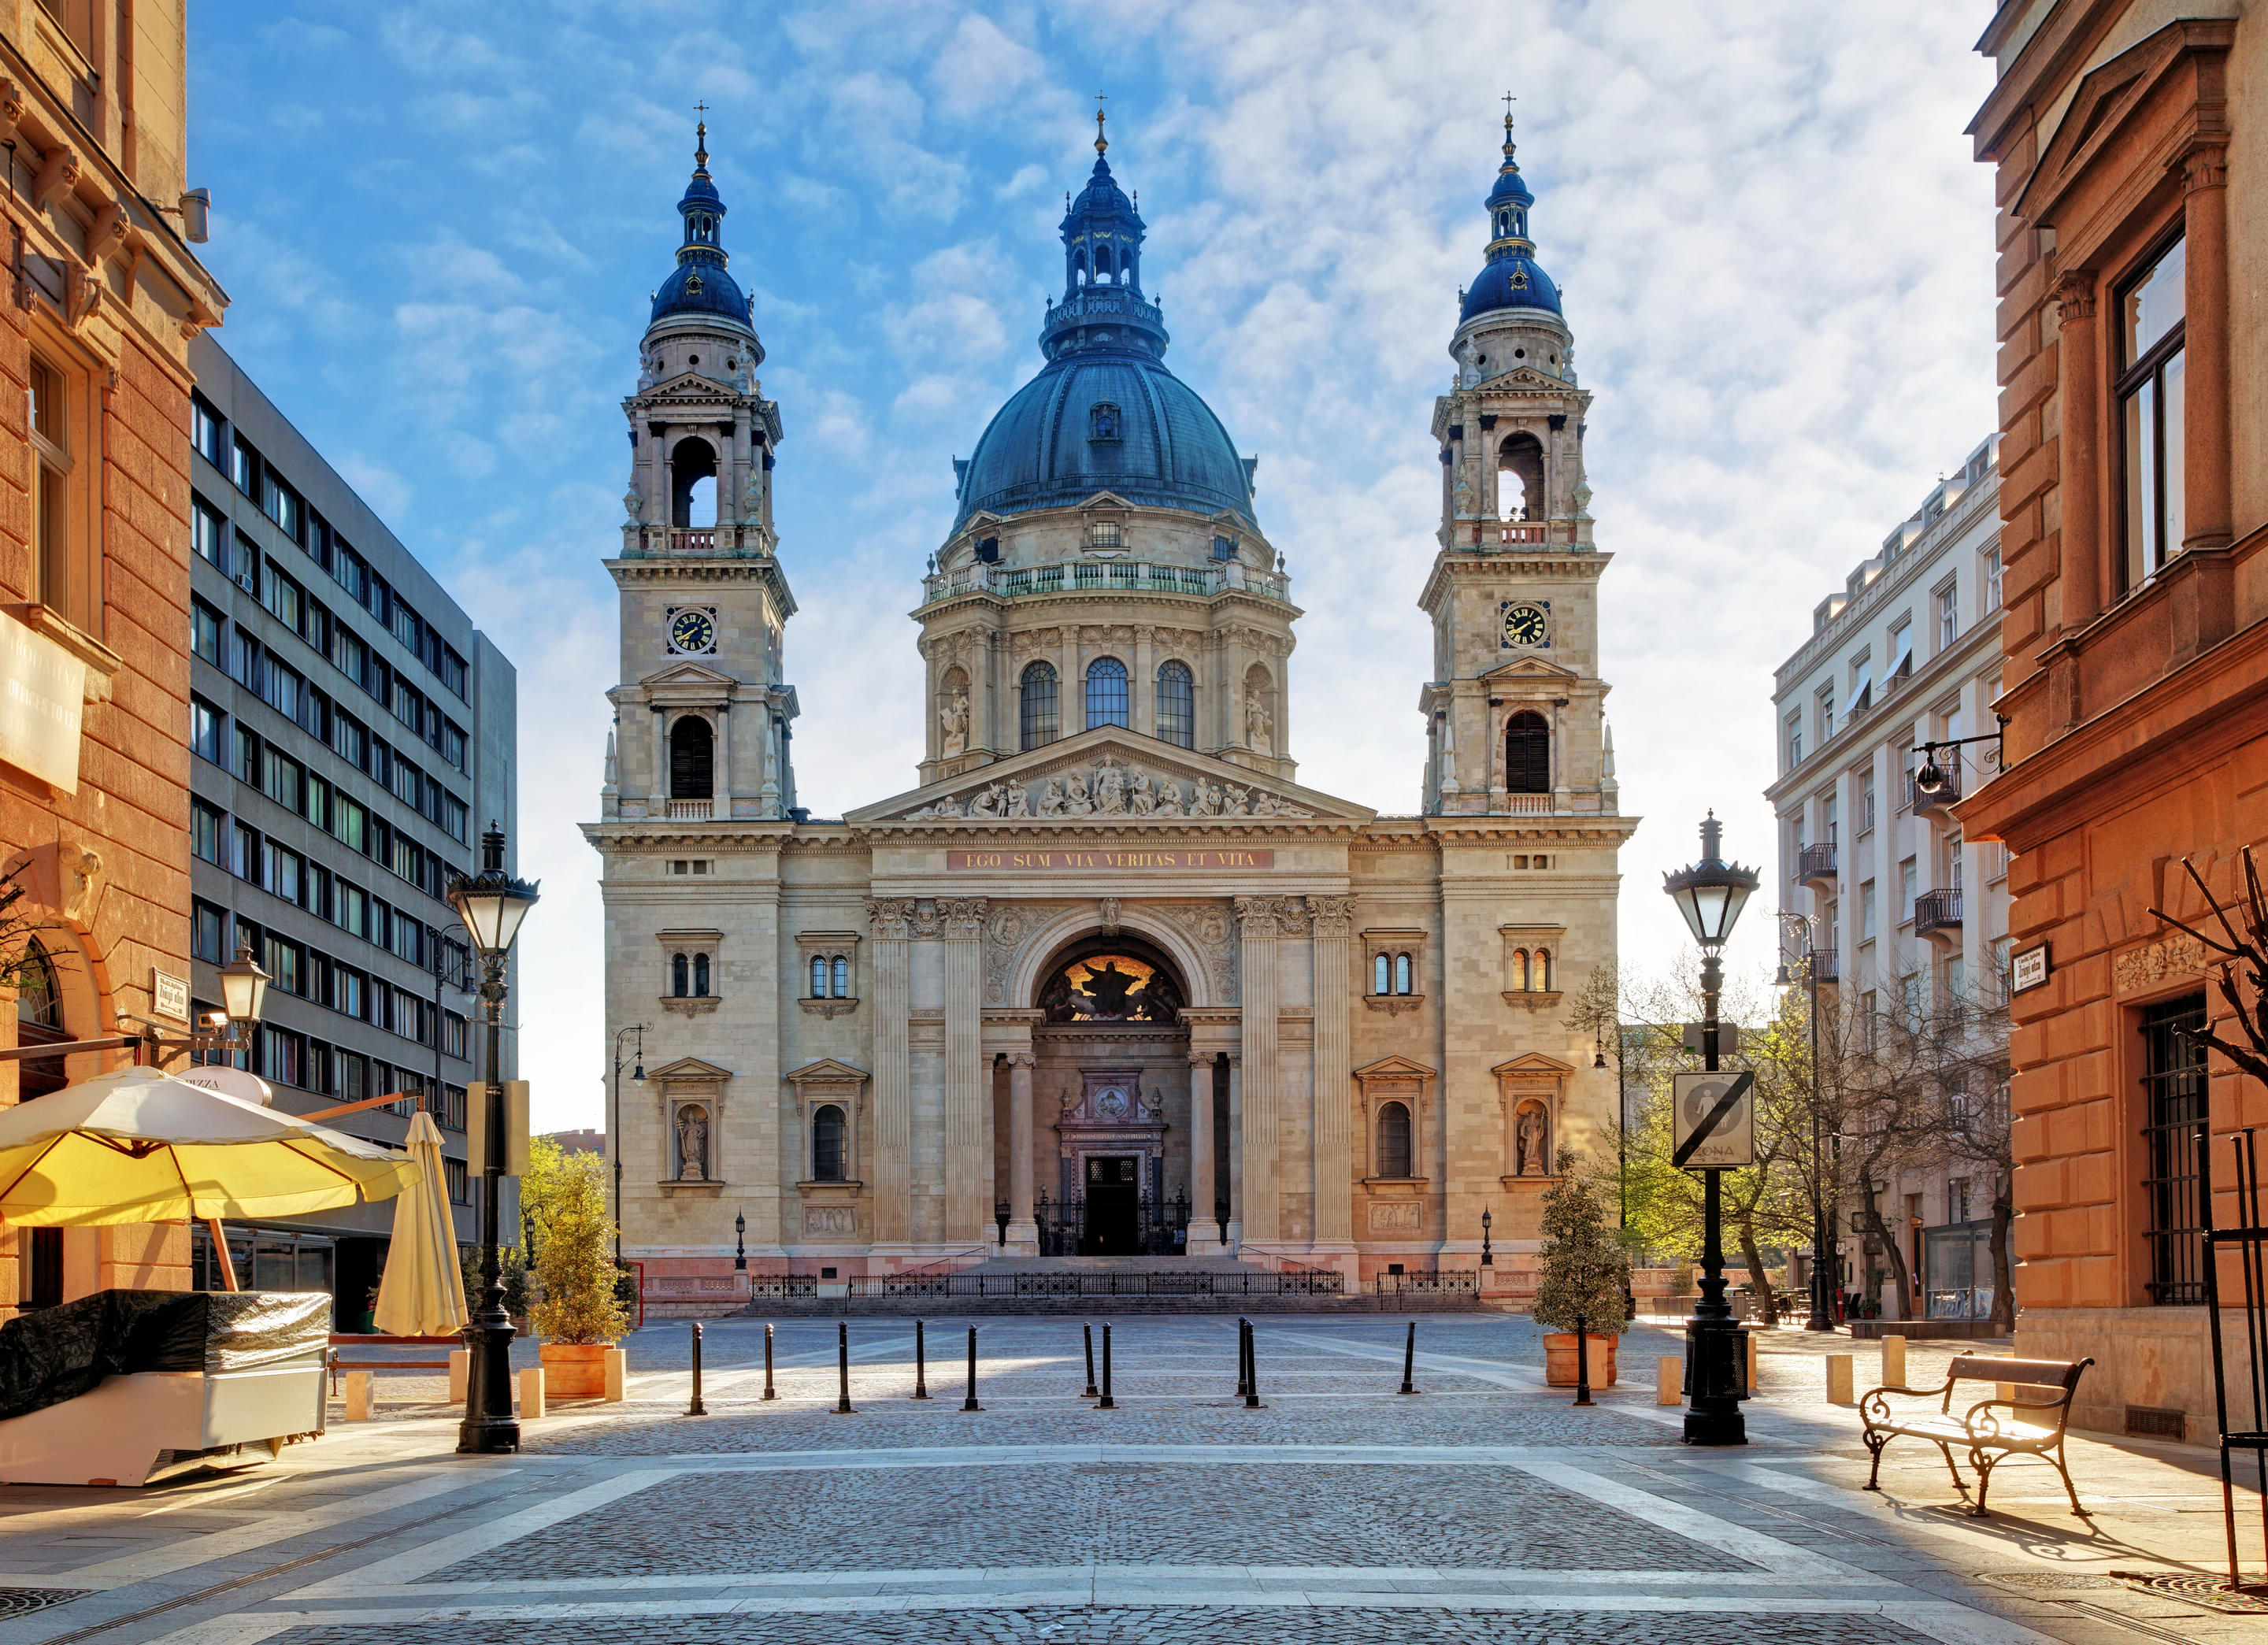 St. Stephens Basilica Overview